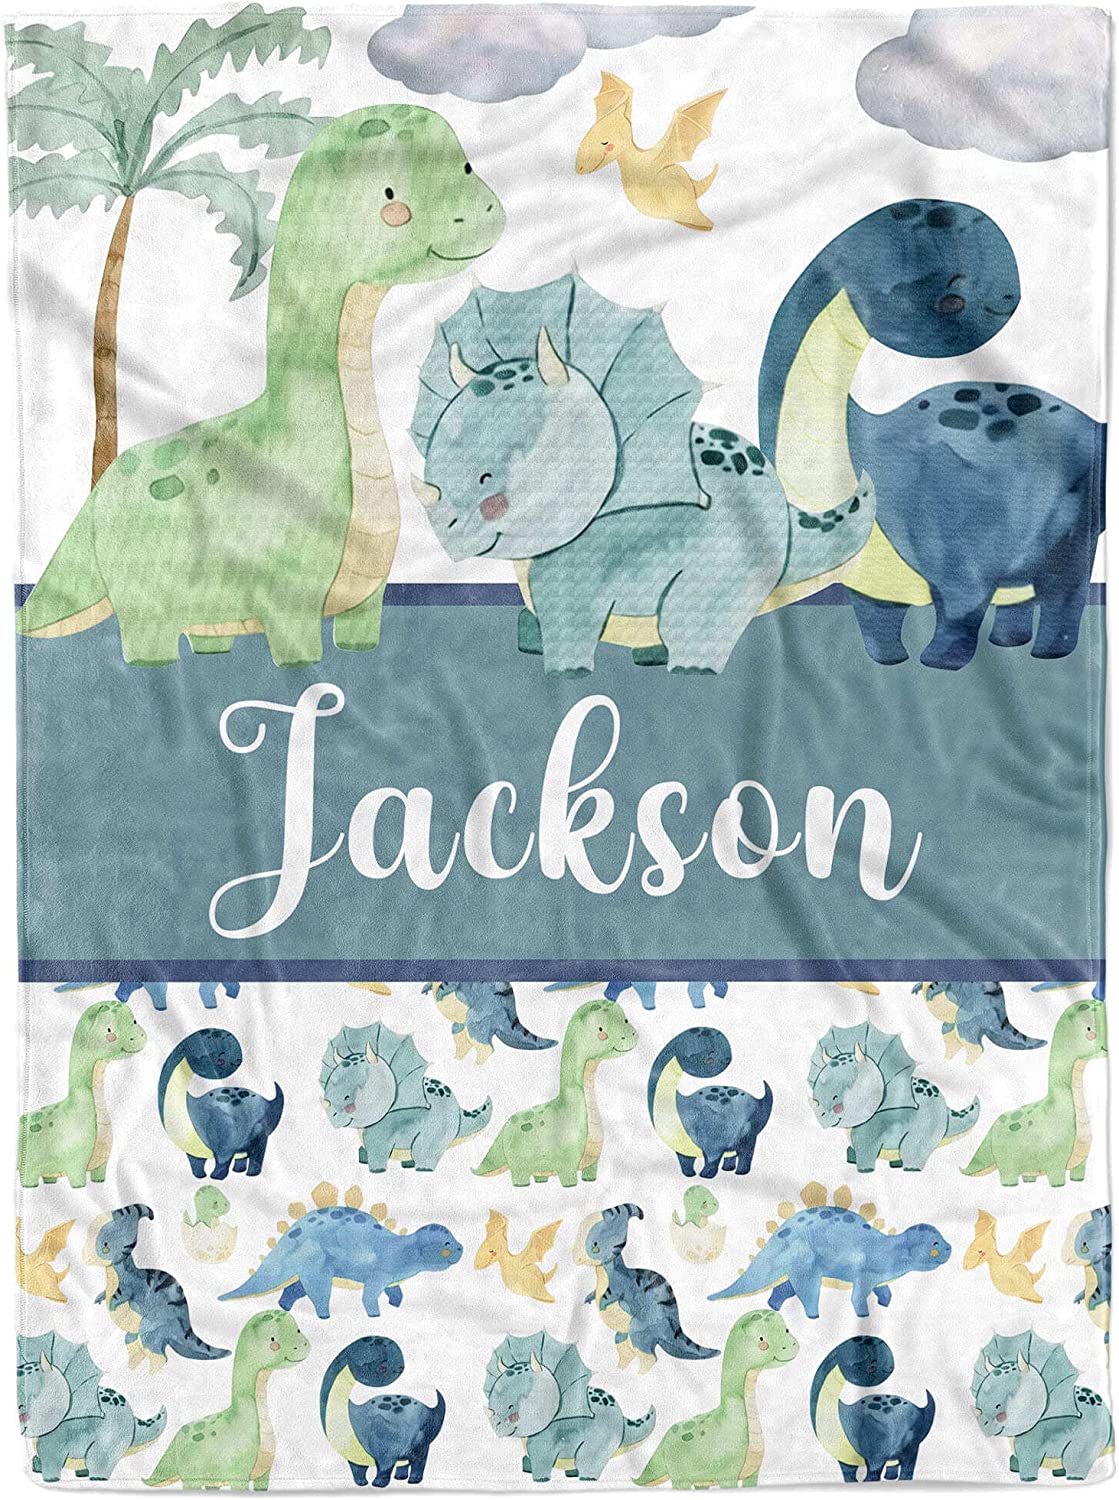 Dinosaur Personalized Baby Blankets - Custom Baby Blanket with Name for Boys - Soft Plush Fleece